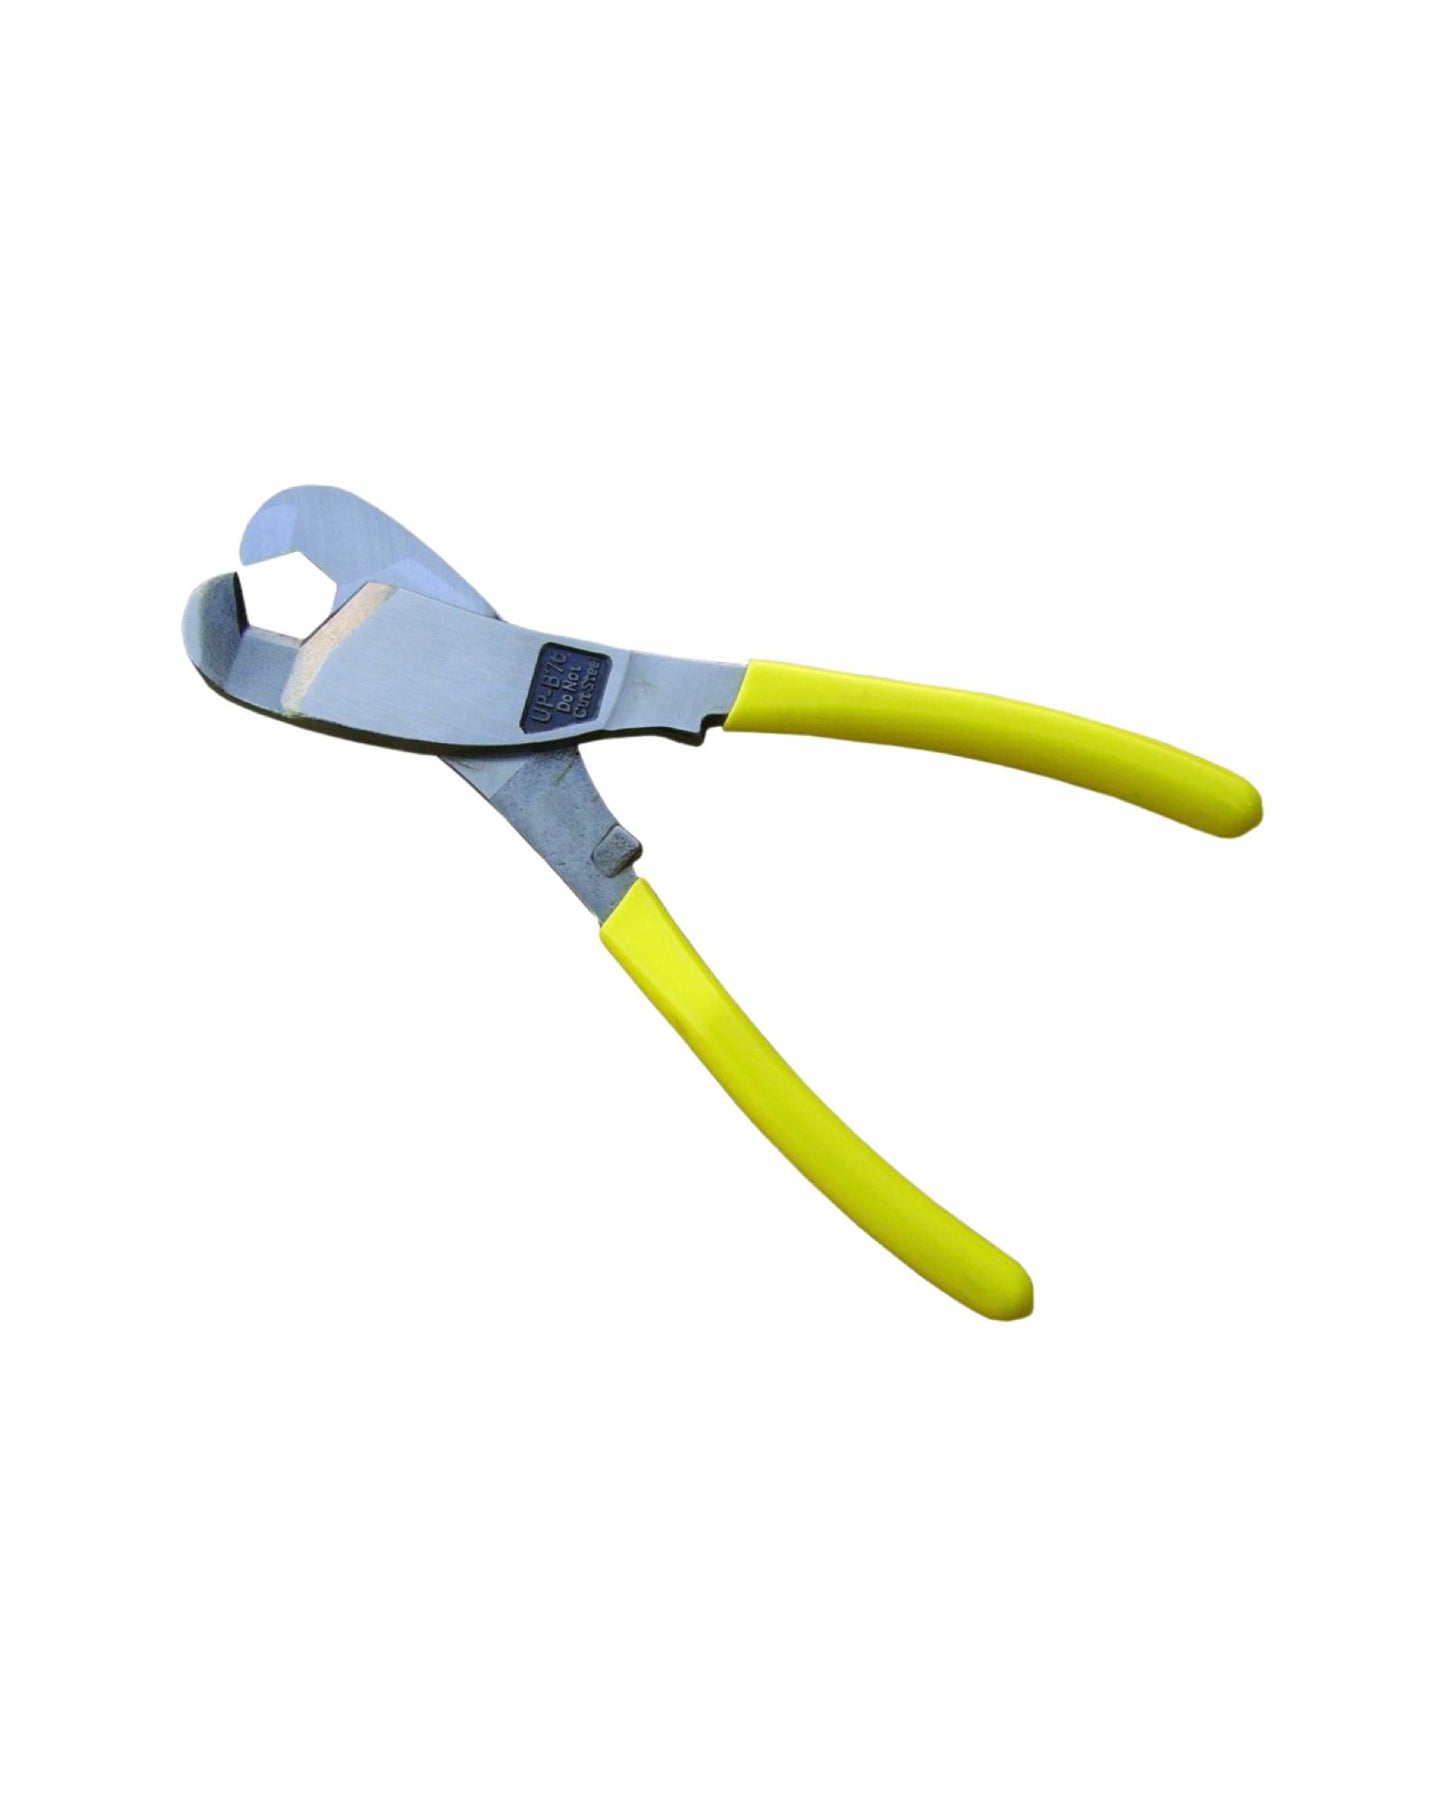 Benner Nawman Coaxial Cable Cutter Yellow Handle - UPB76 Cutters Benner-Nawman 